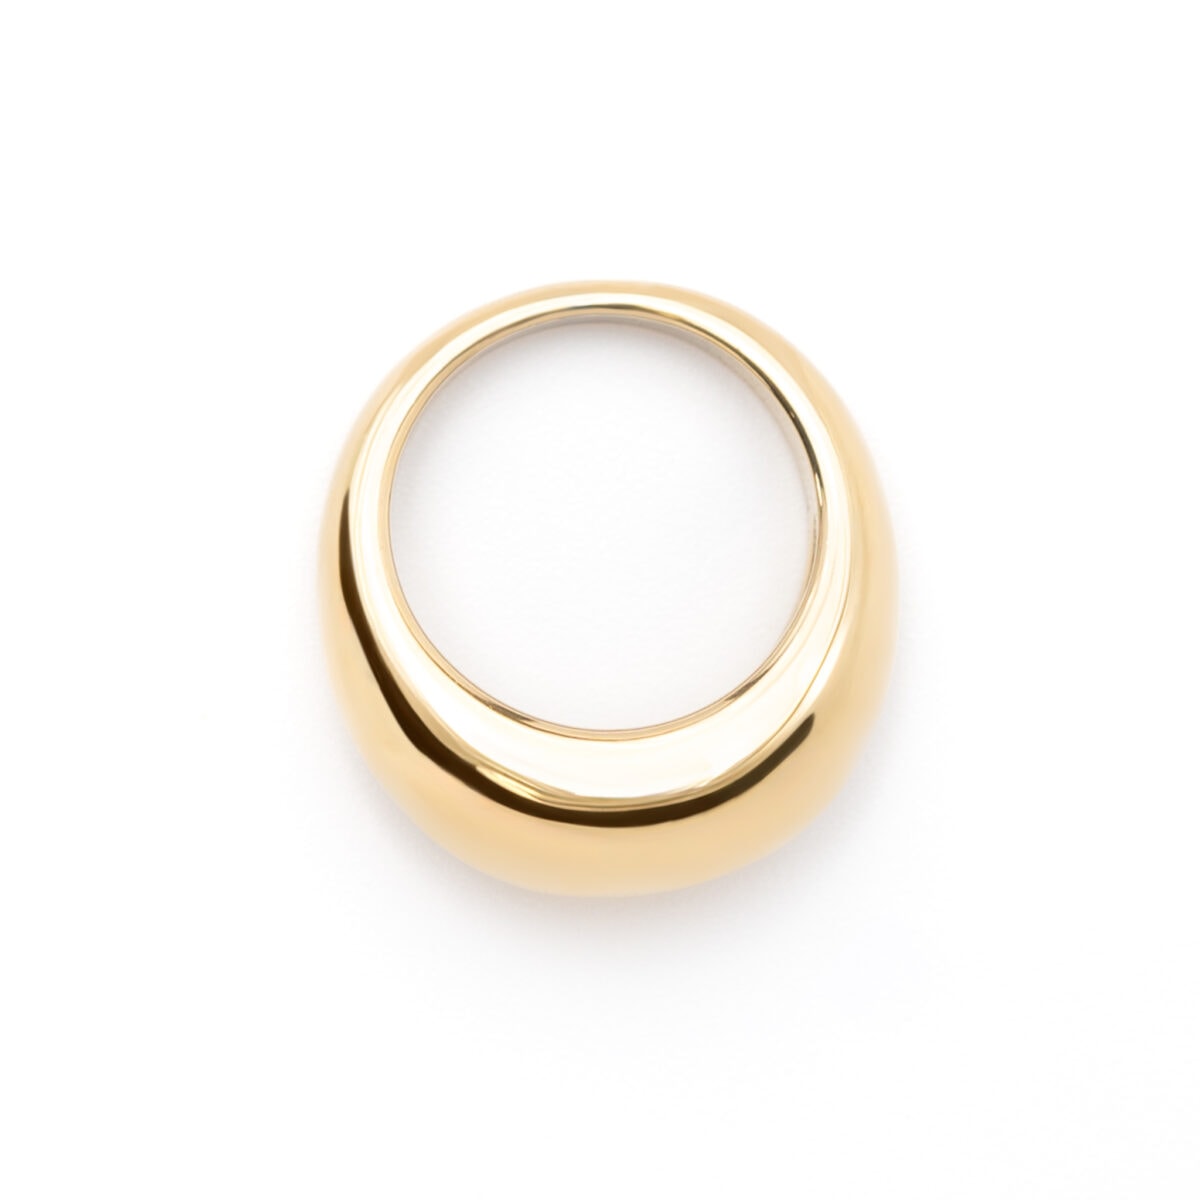 https://m.clubbella.co/product/gold-dome-ring/ Gold dome ring v2a